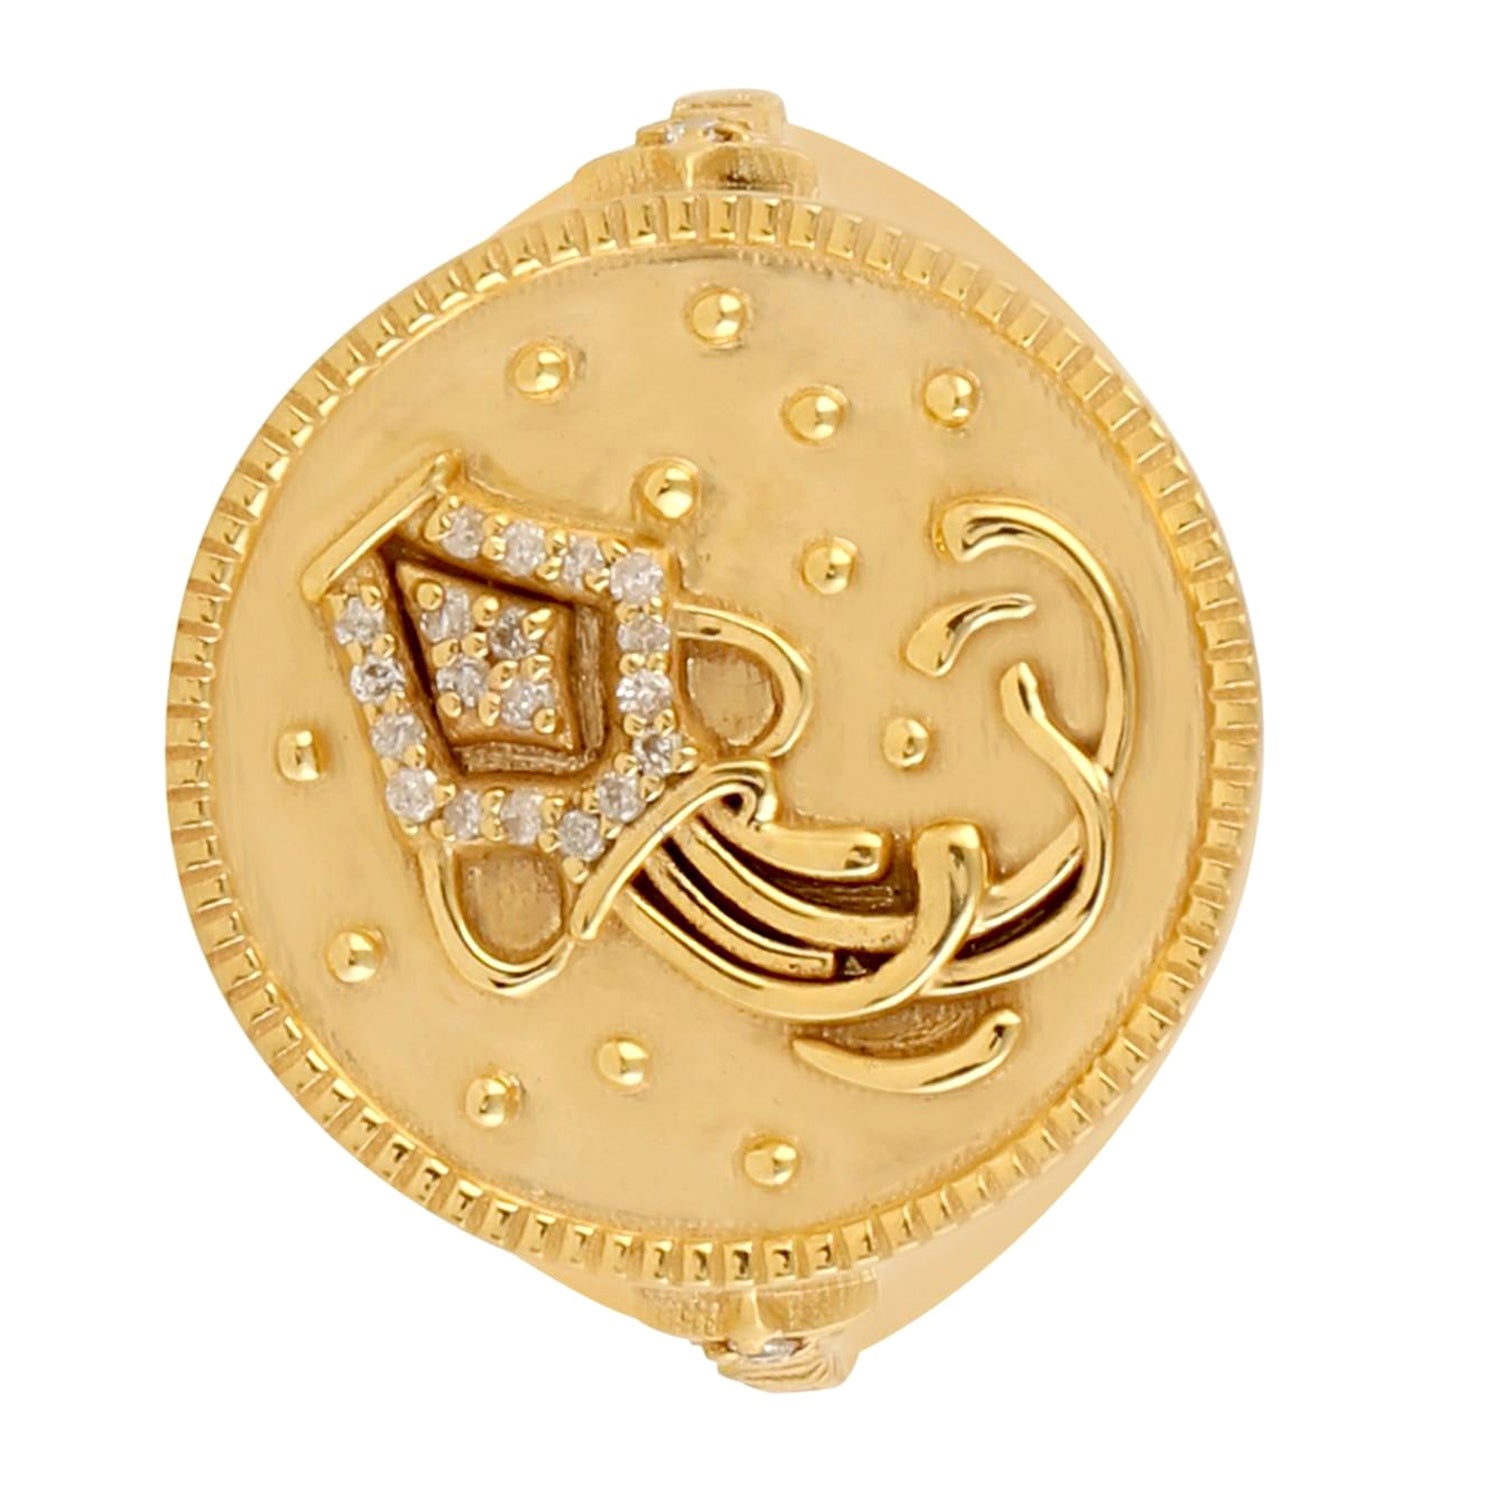 Aquarius Sunsign Zodiac Ring with Pave Diamonds Made in 14k Gold For Sale